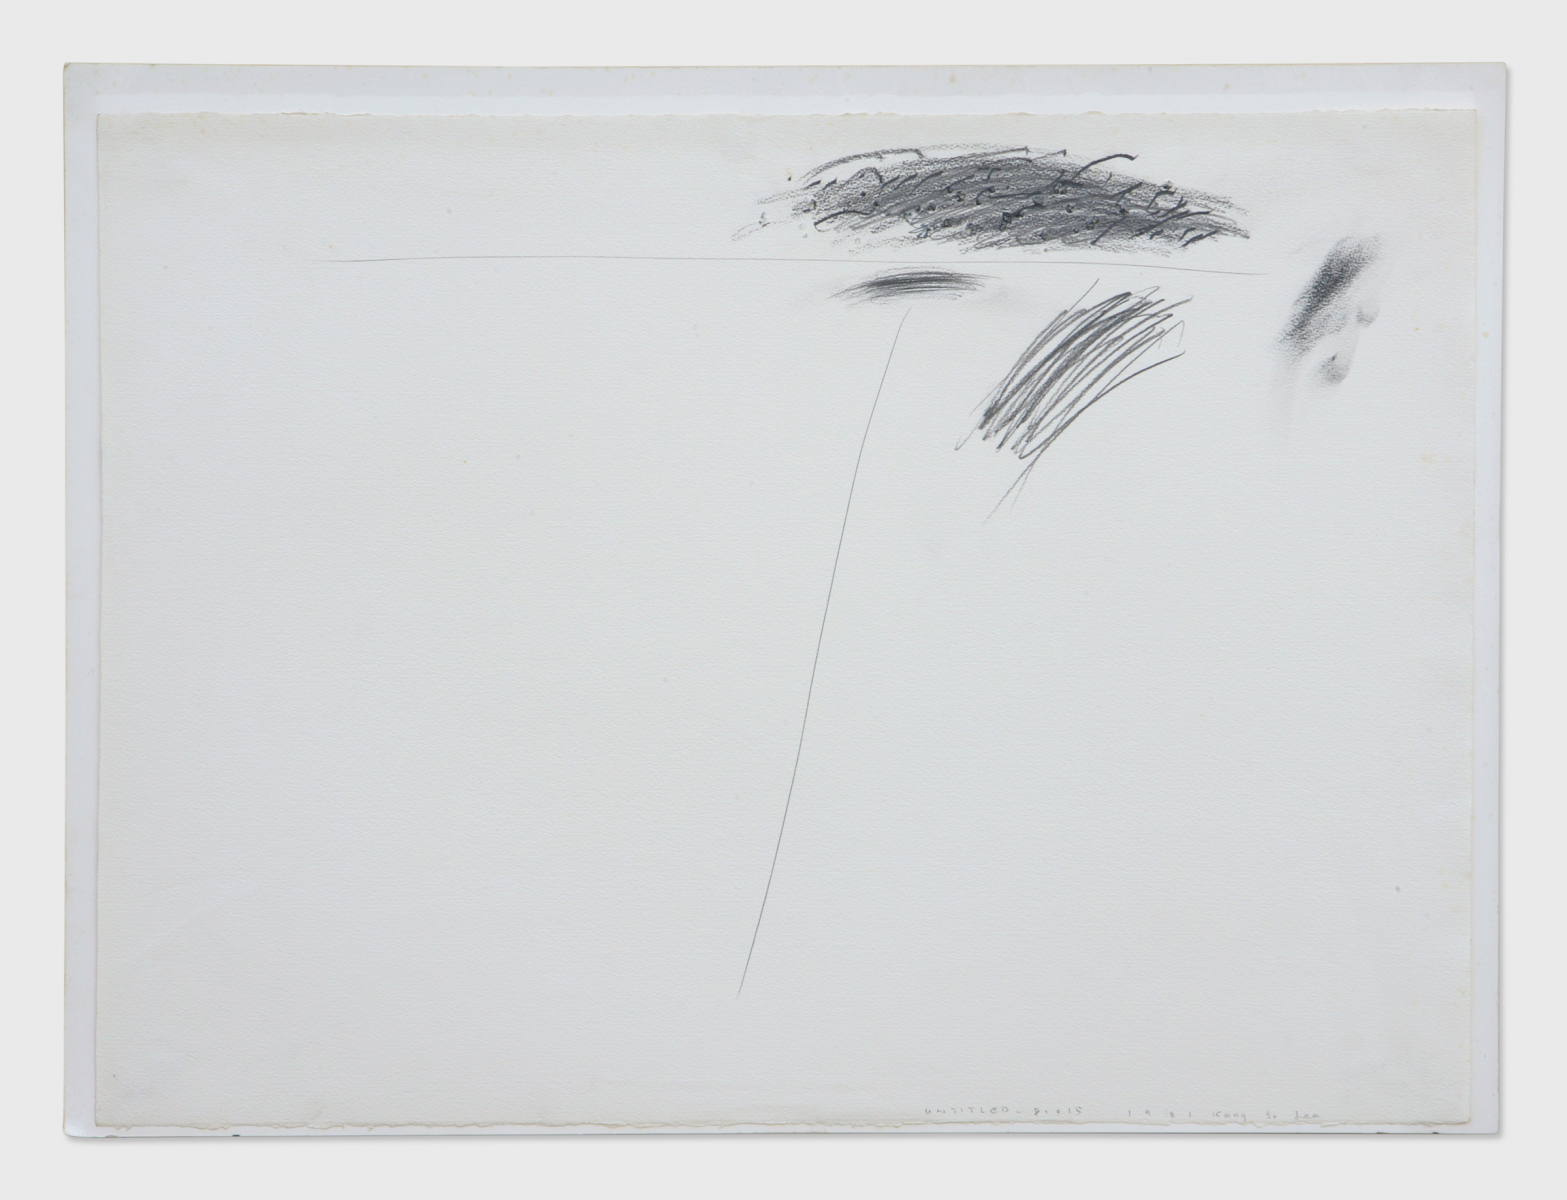 Untitled-81015, 1981, Pencil on Paper, 56x76cm